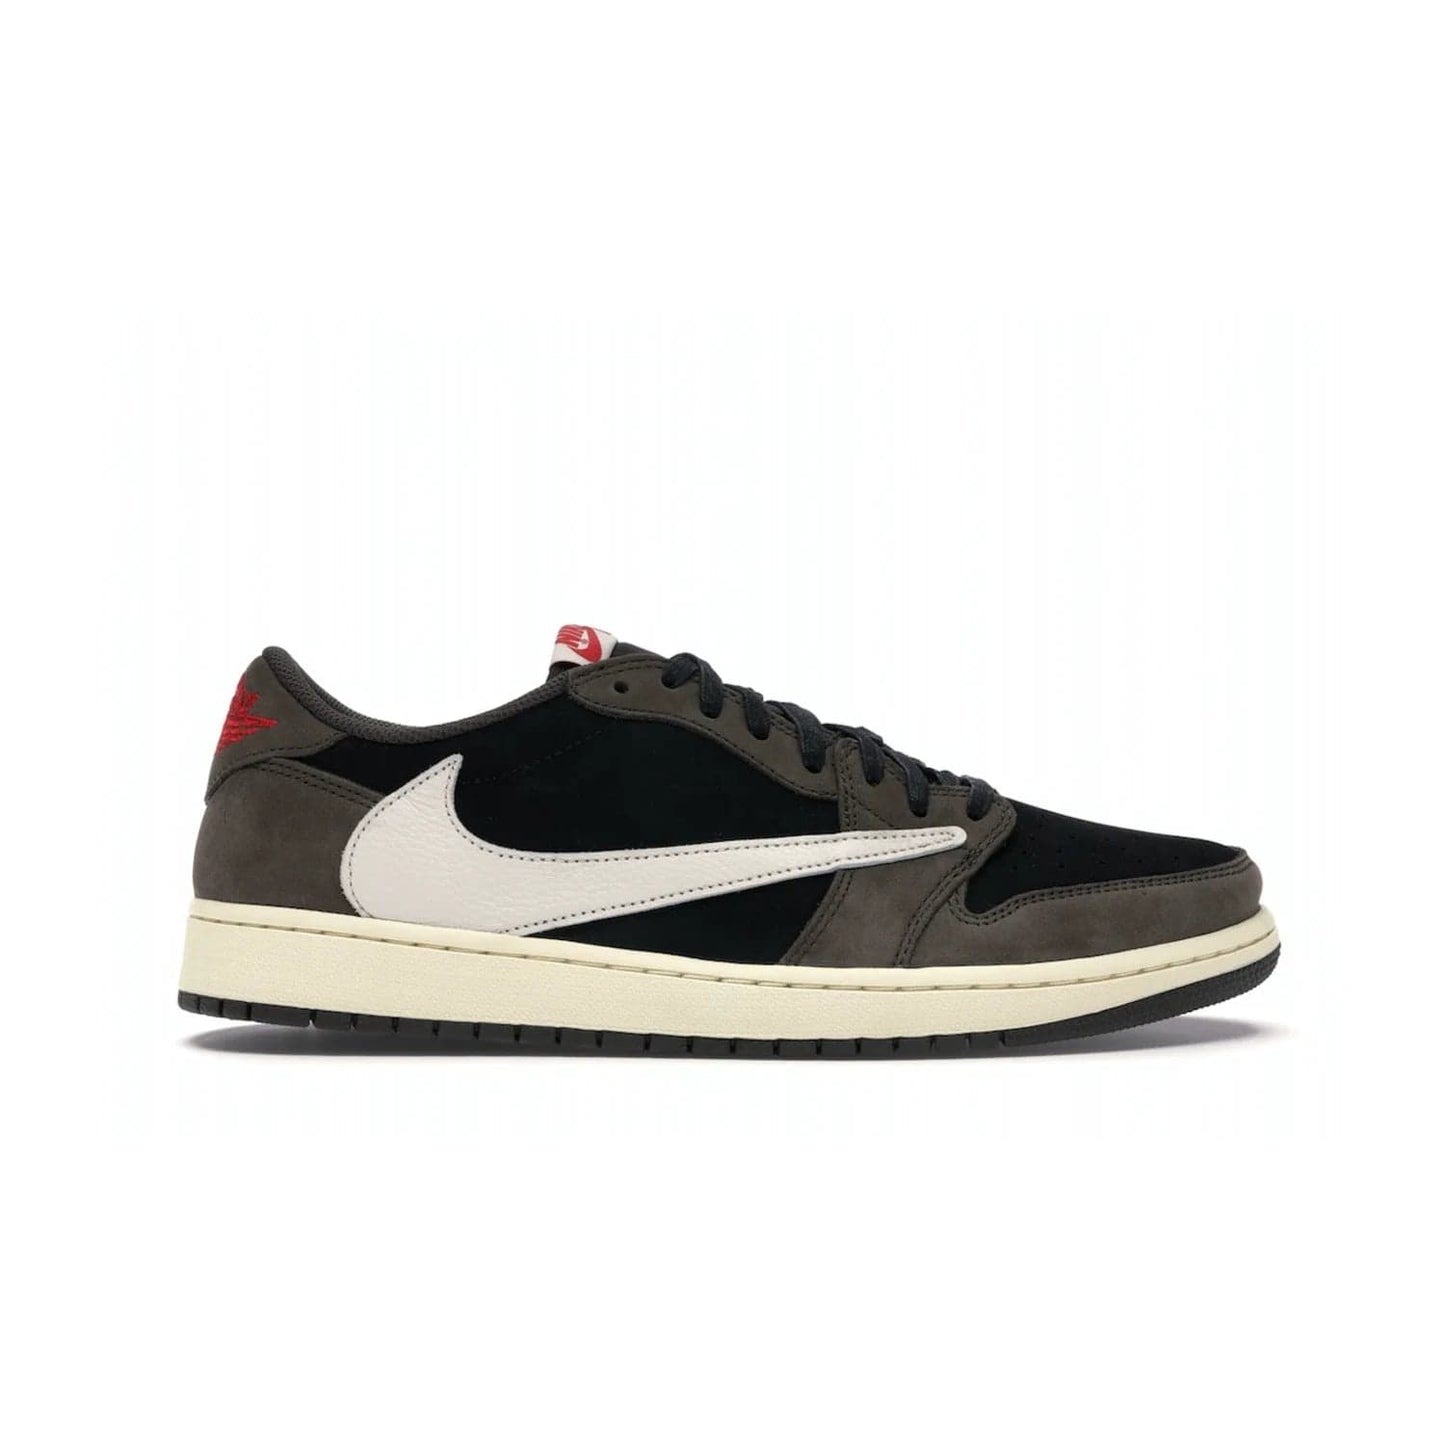 Jordan 1 Retro Low OG SP Travis Scott - Image 1 - Only at www.BallersClubKickz.com - The Air Jordan 1 Low Travis Scott combines modern and classic design elements for a stylish look. It features a black upper with dark brown overlays, red accents, sail midsole, and dark brown outsole. Signature touches include a backwards Swoosh logo and “Cactus Jack” inscriptions. Released in July 2019.